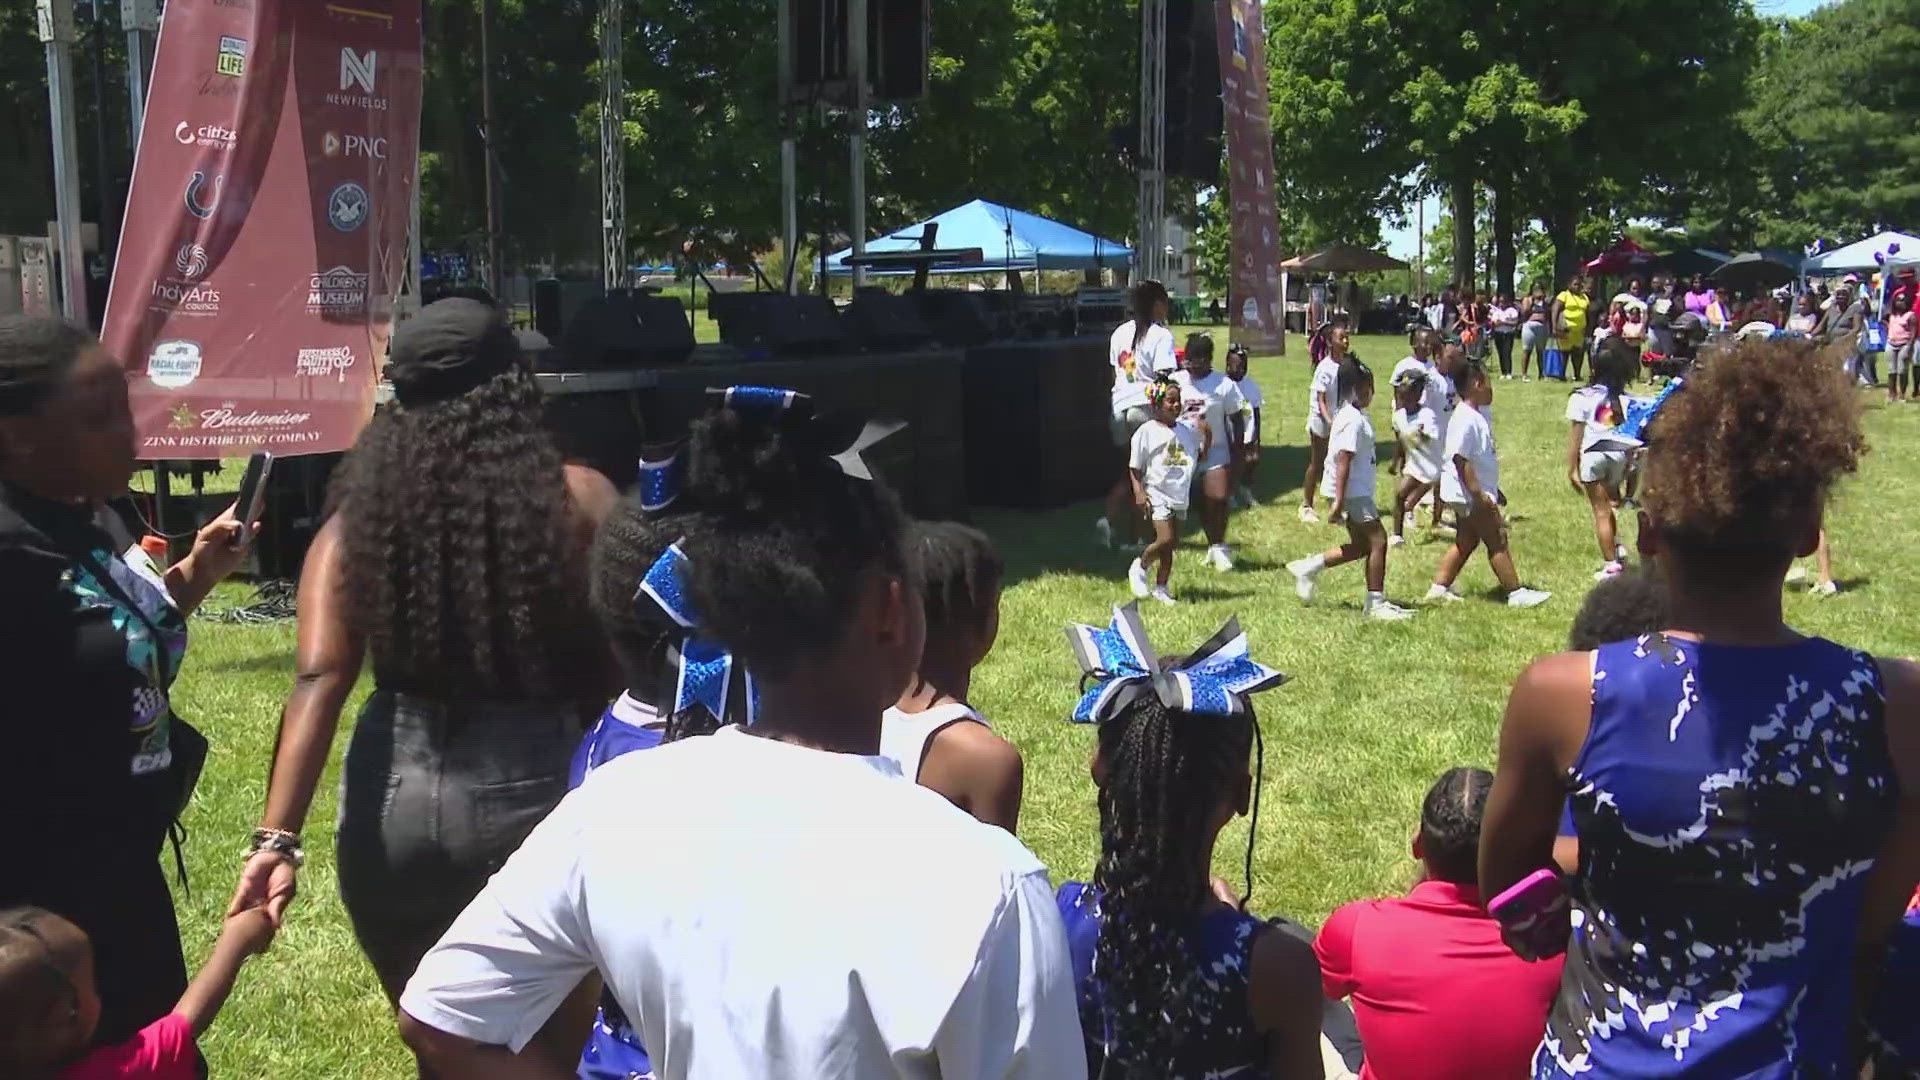 Over 15,000 people made their way over to Military Park to watch performances from dance and cheer groups and enjoy local food vendors and businesses.